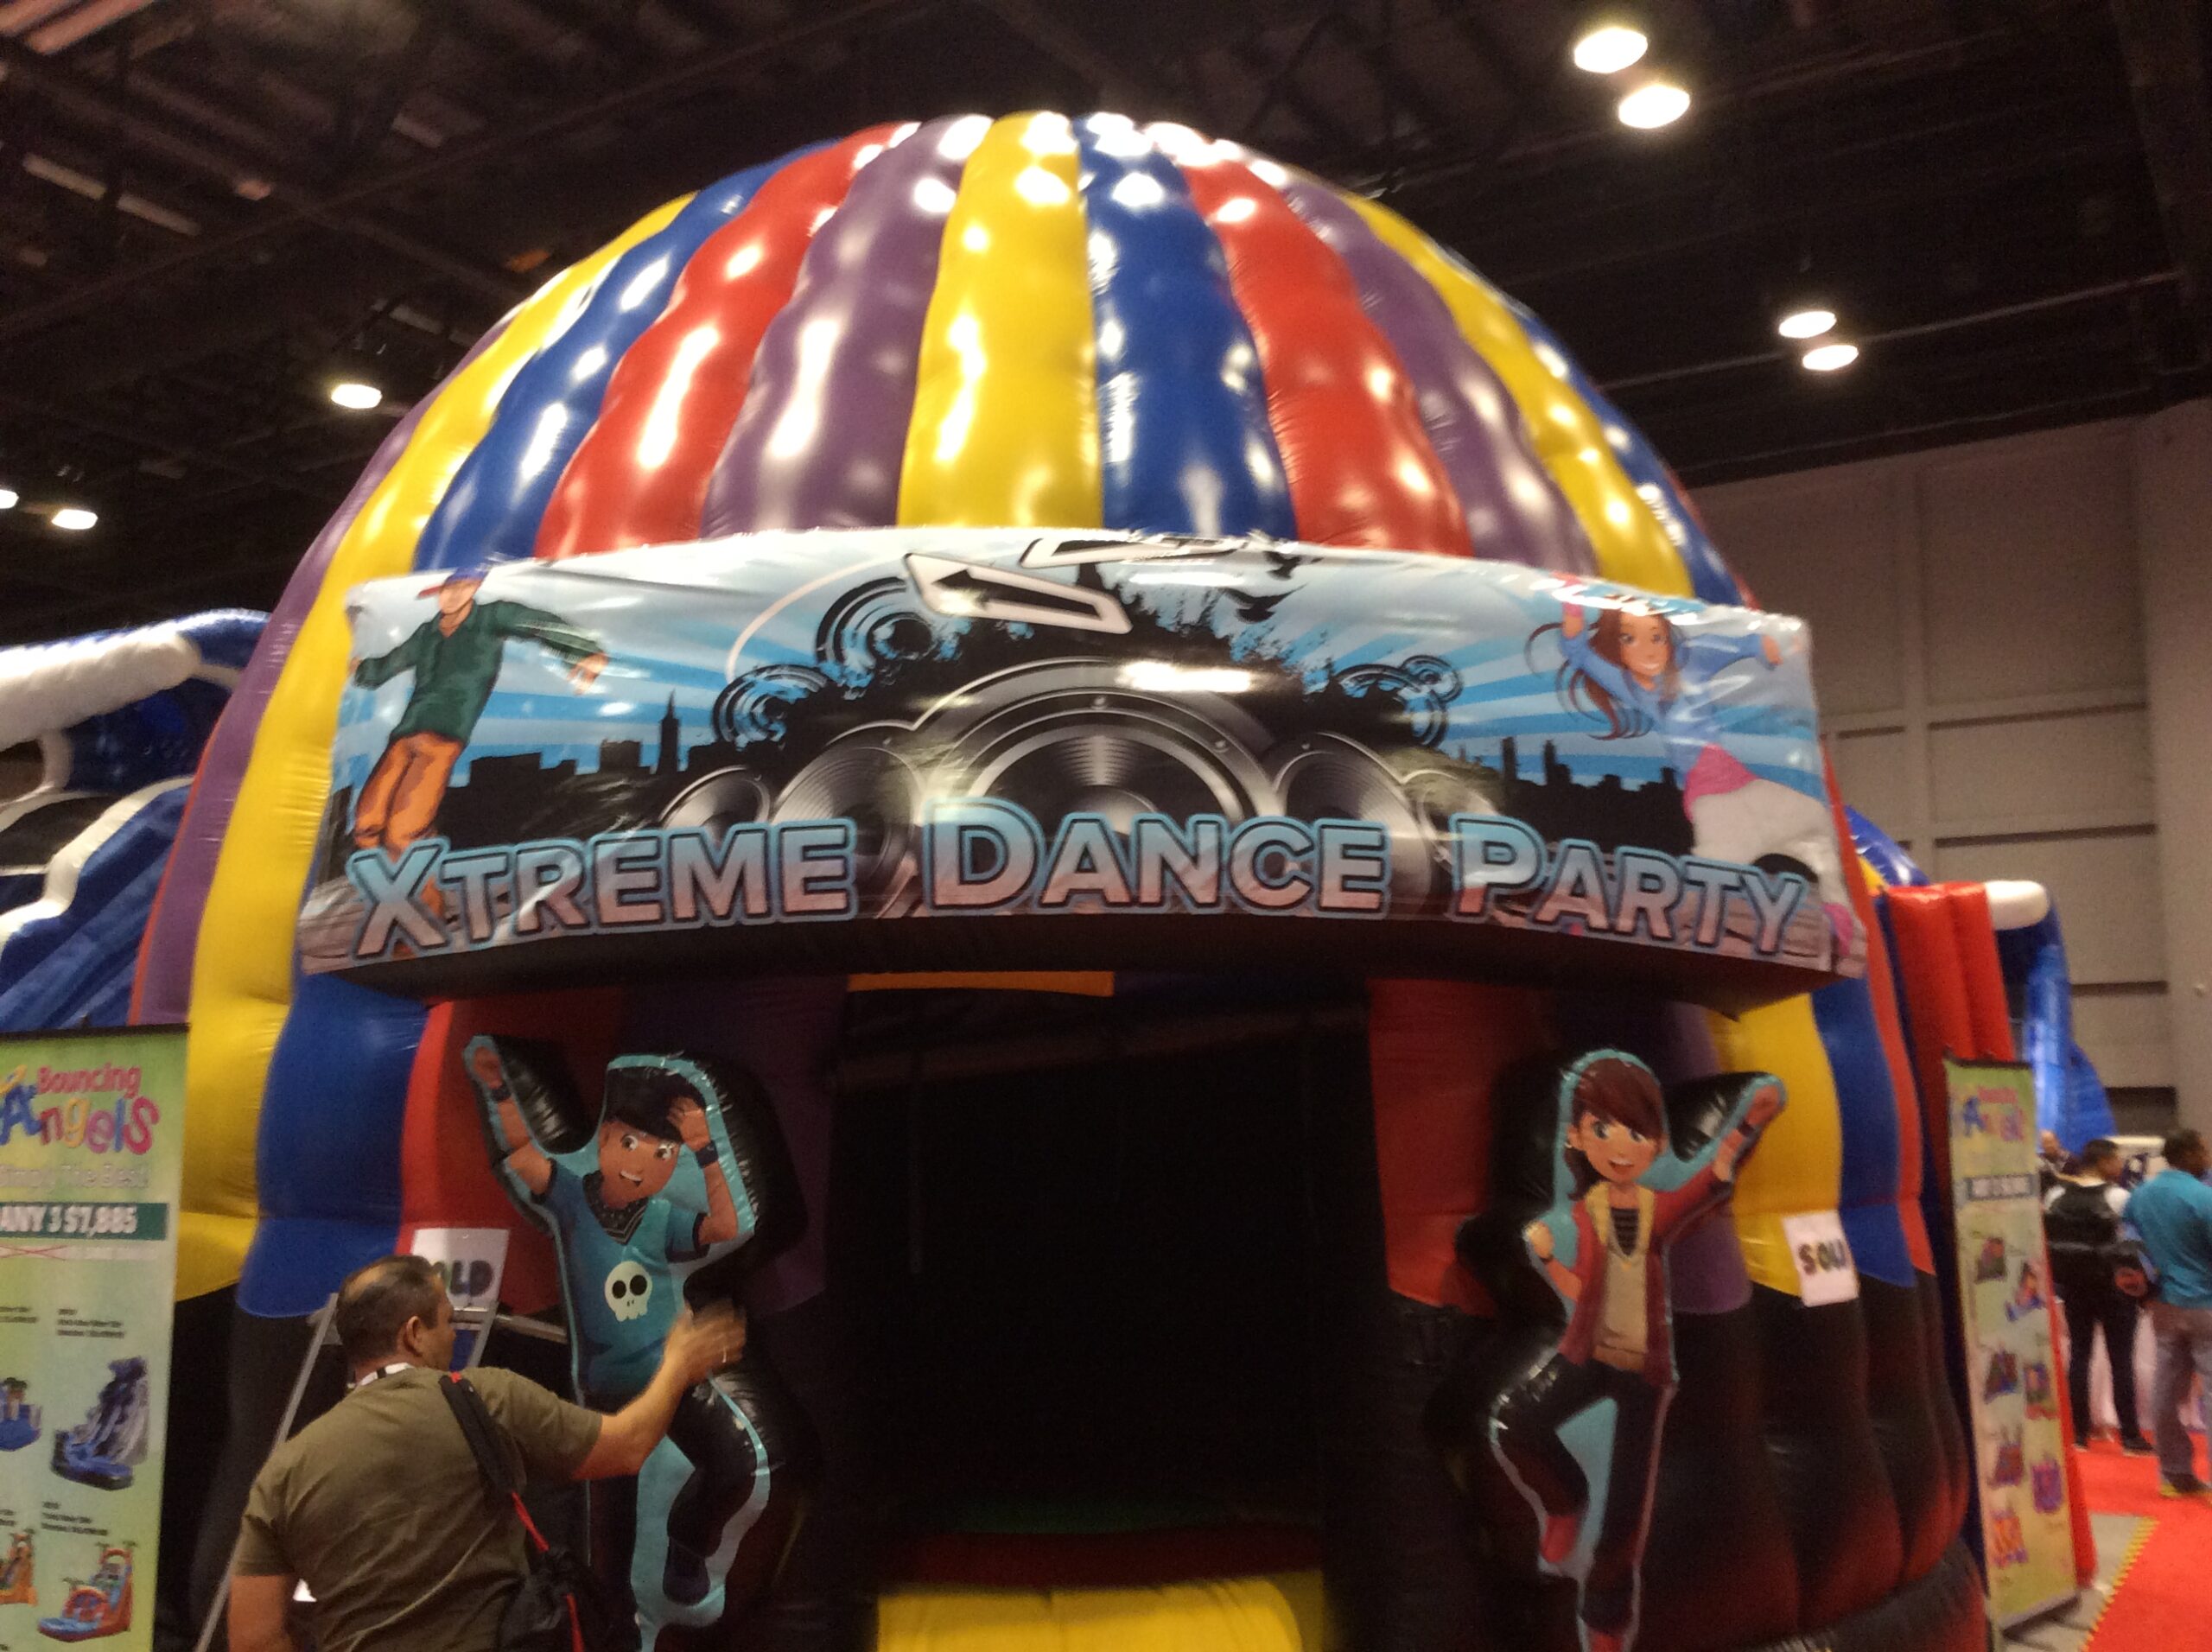 Inflatable extreme dance party bouncer